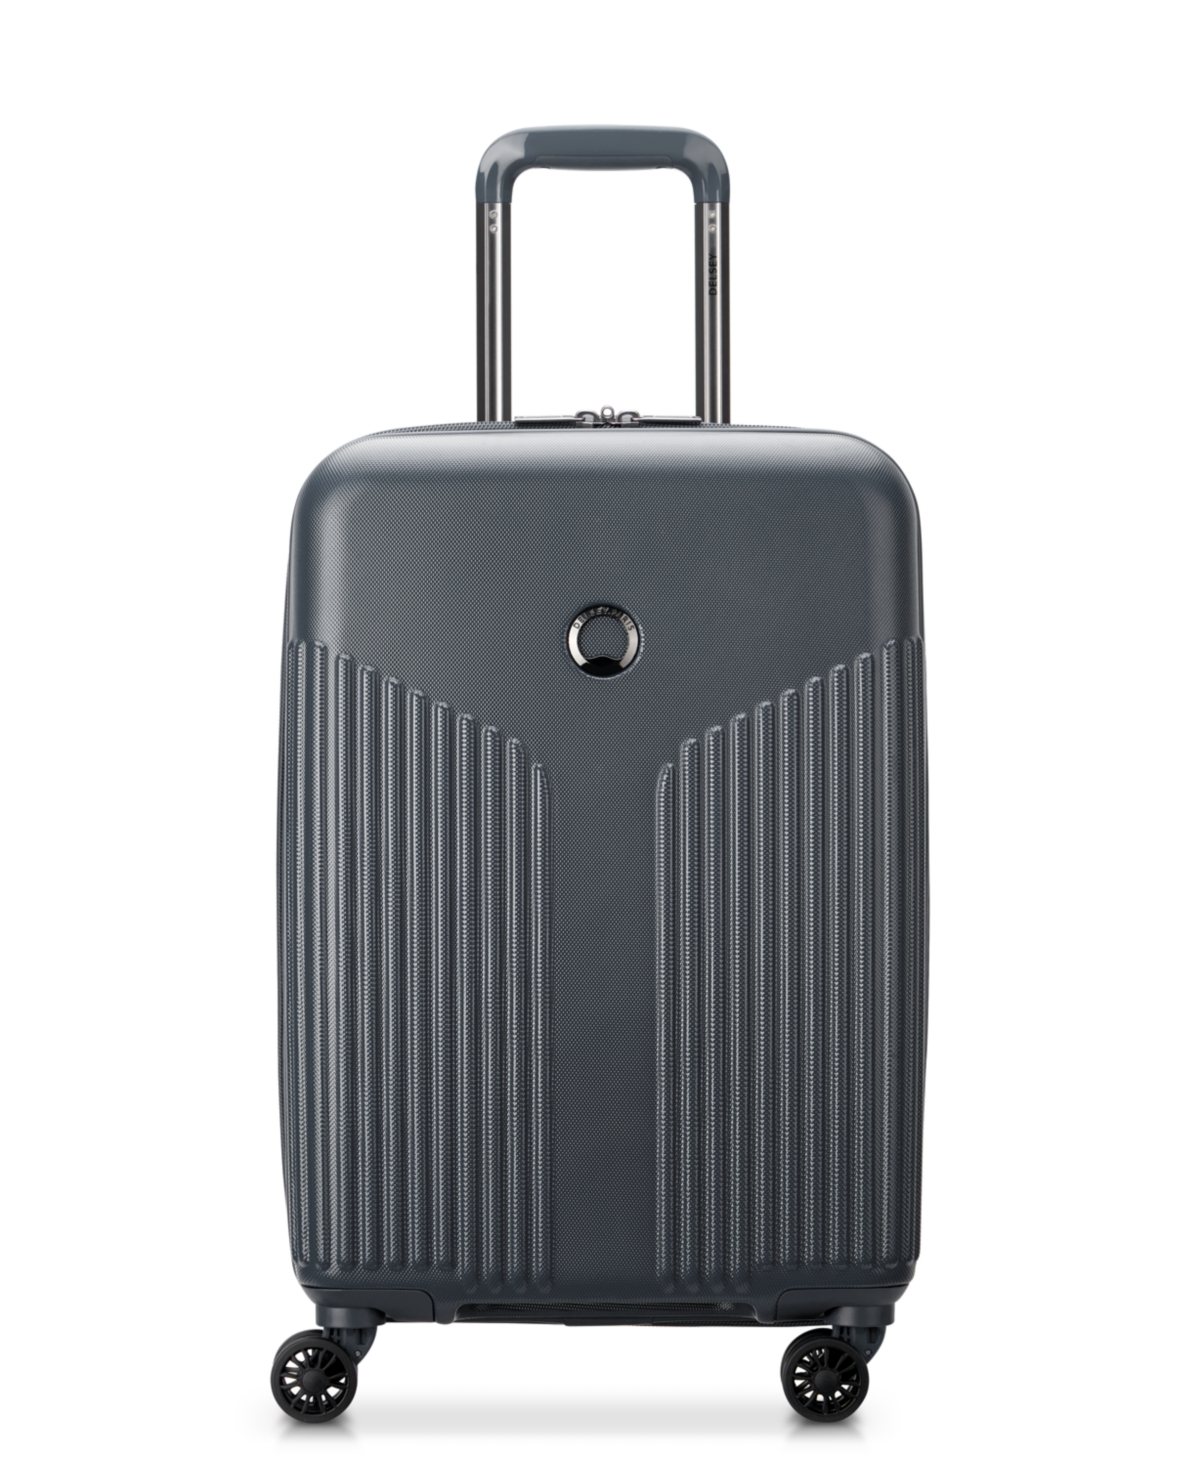 Comete 3.0 20" Expandable Spinner Carry-On Luggage - Lavendar